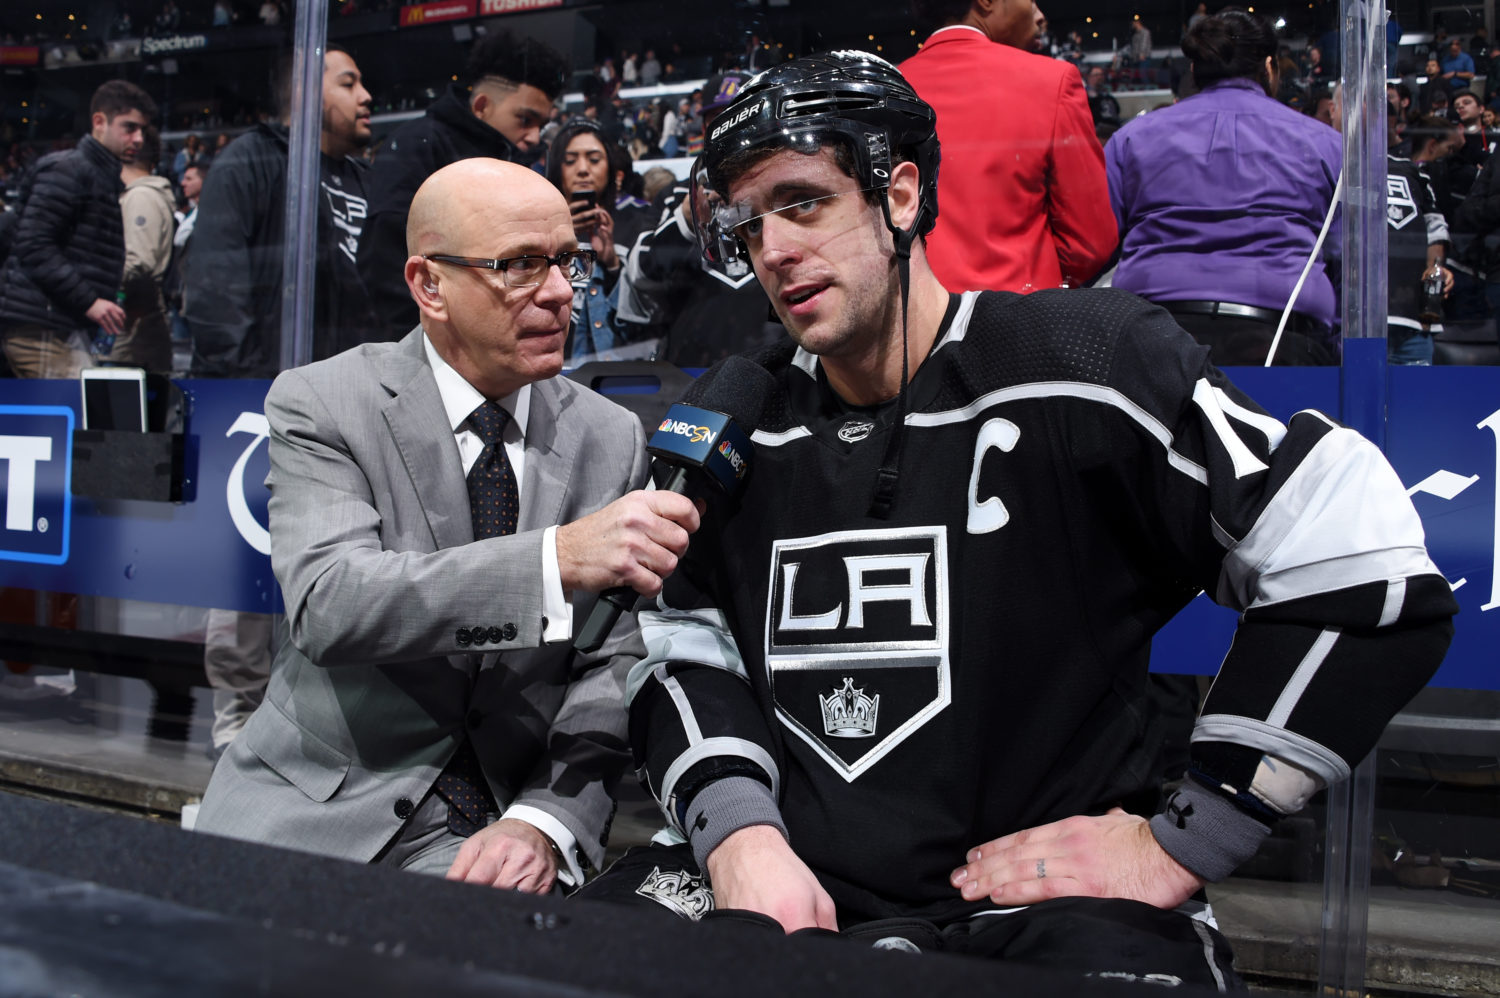 Seven LA Kings games to be broadcast 